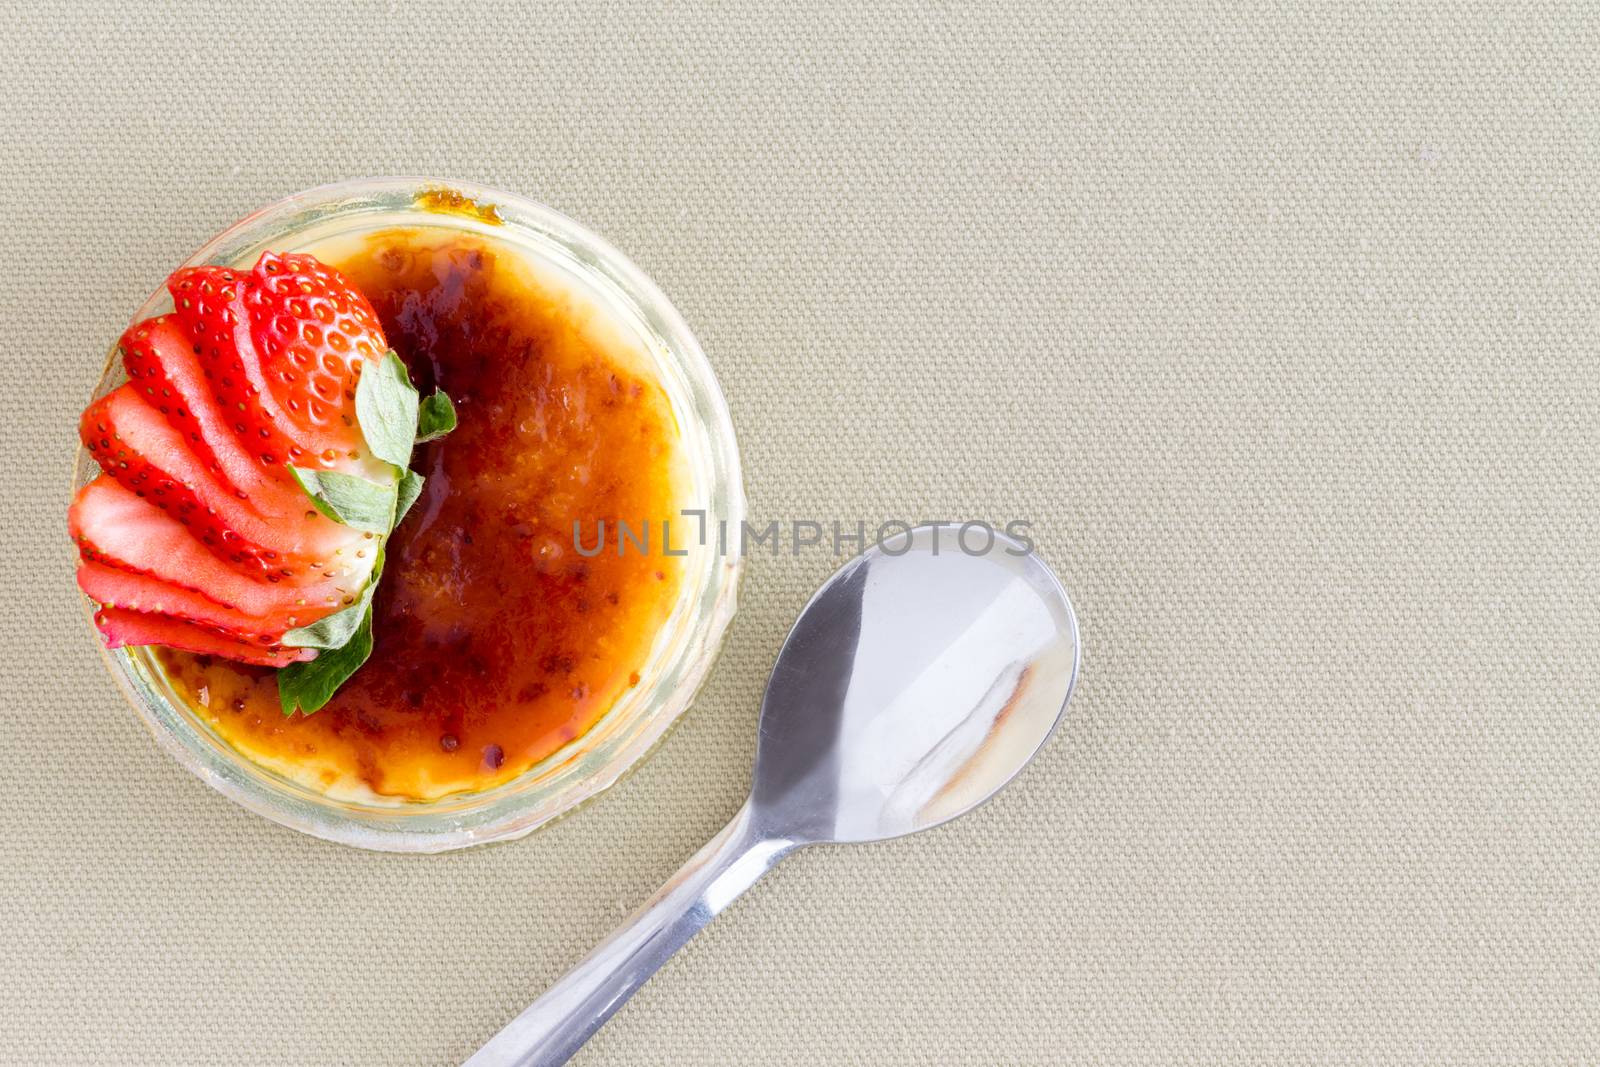 Delicious custard dessert topped with strawberry slices from point of view angle with spoon over brown tablecloth